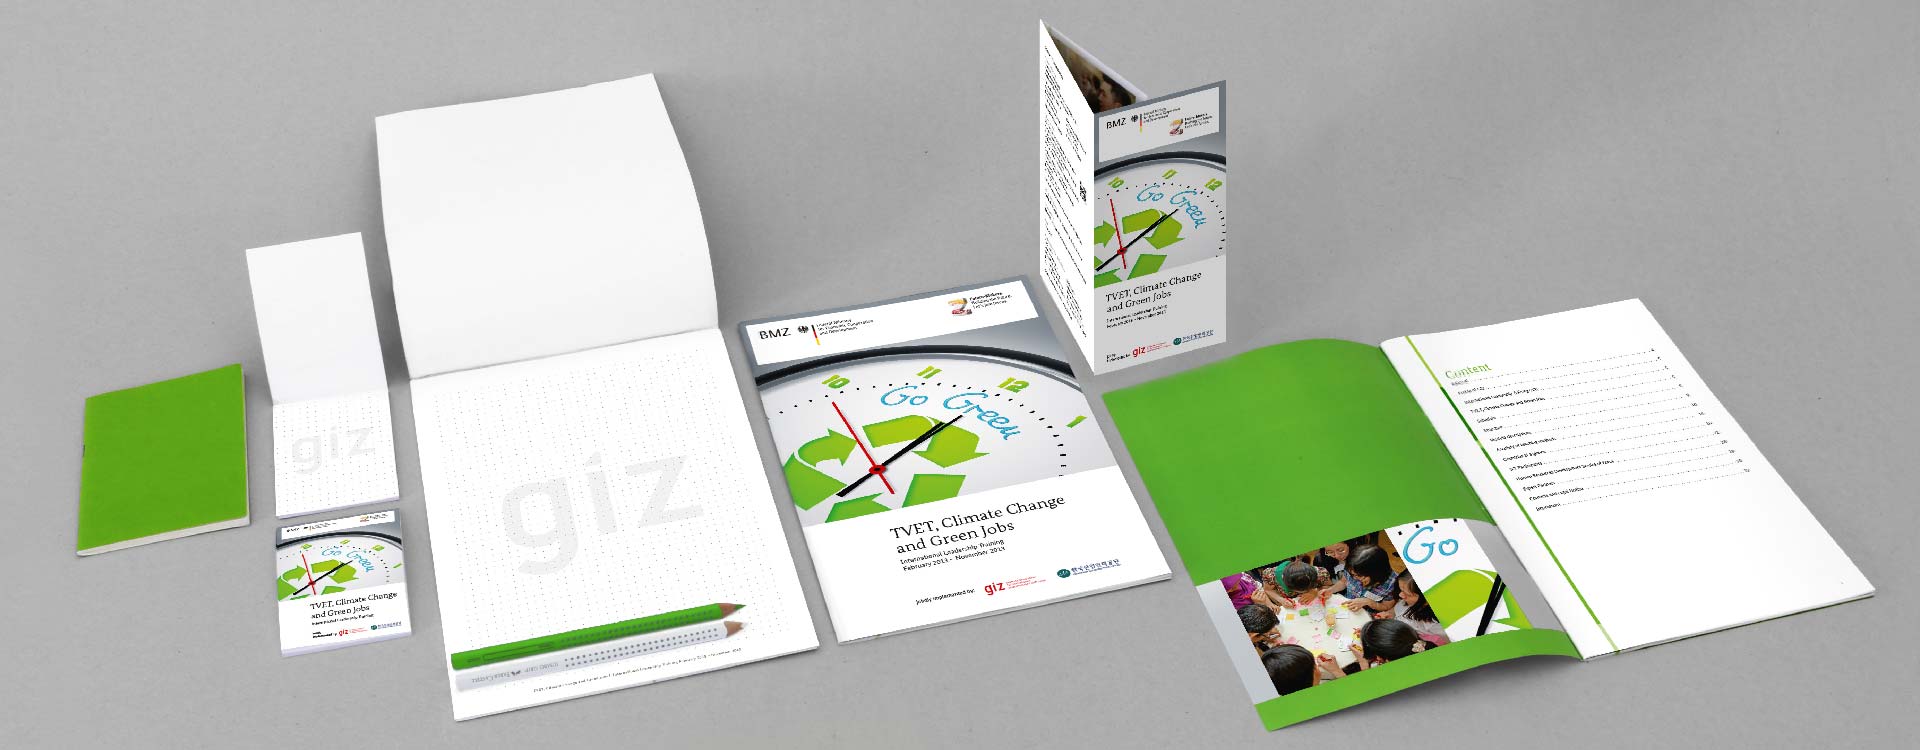 Printed matter for the project of the GIZ Magdeburg Technical Vocational Education and Training, Climate Change and Green Jobs; Design: Kattrin Richter | Graphic Design Studio